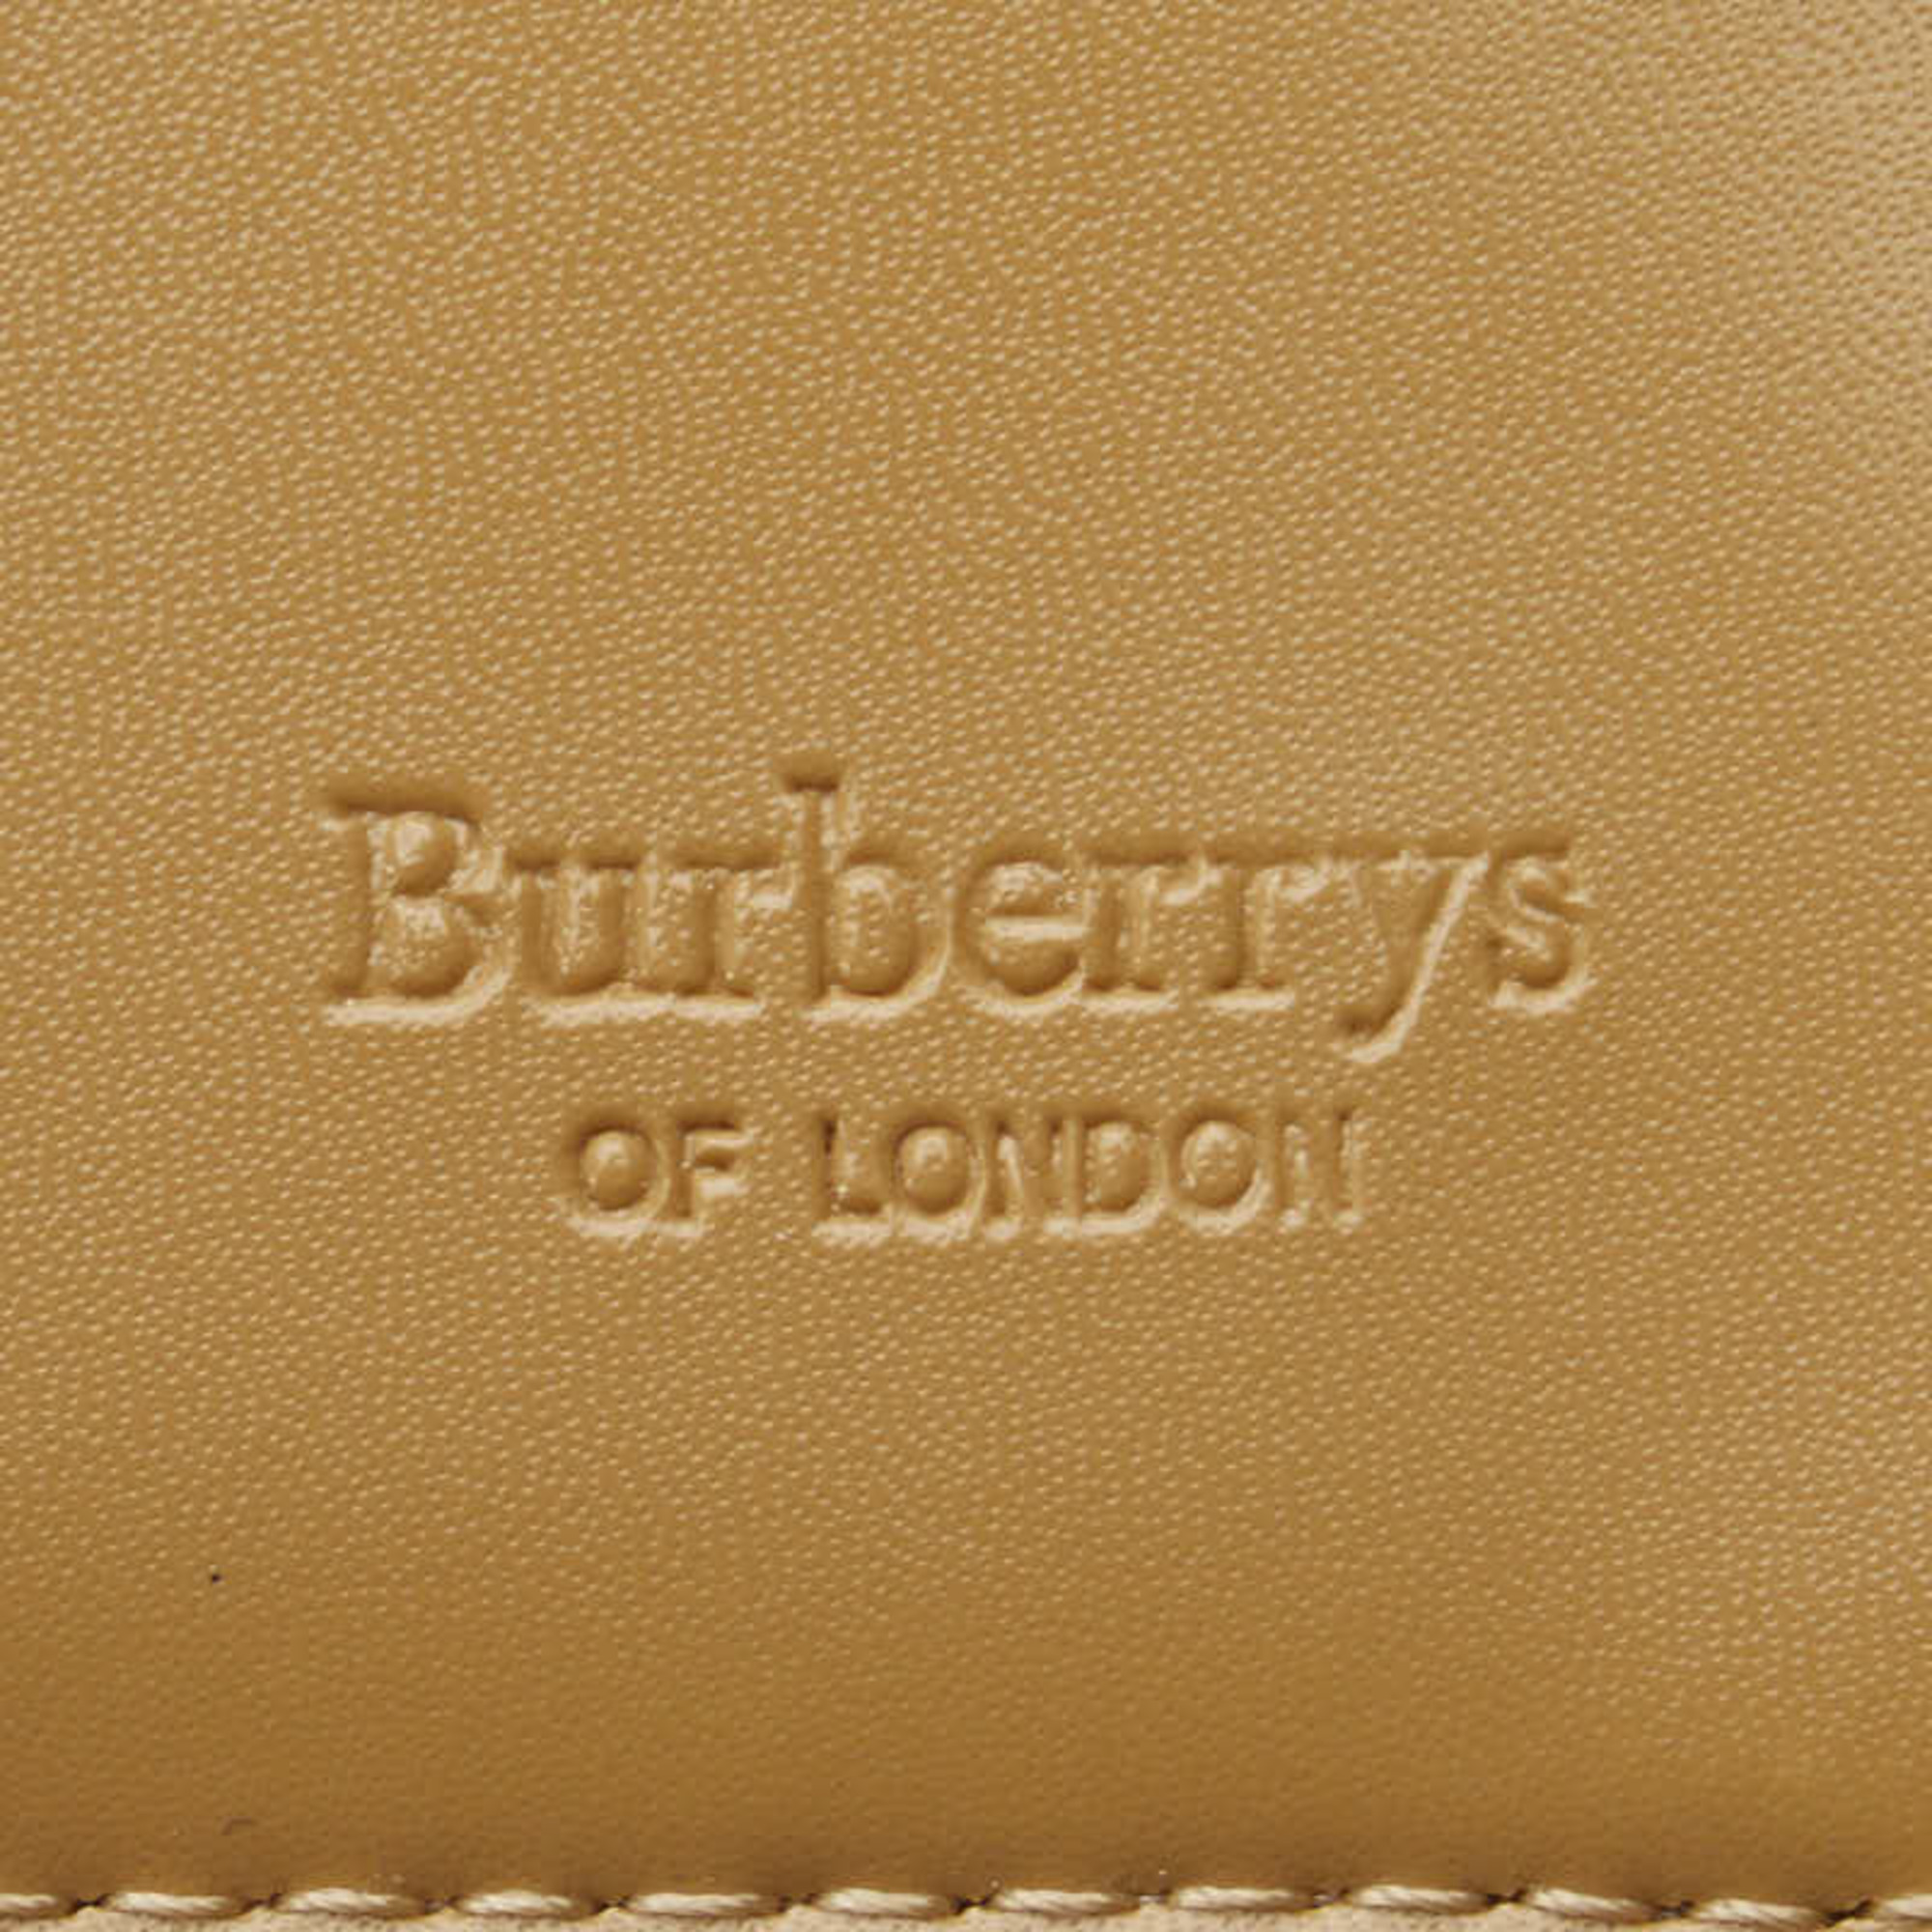 Burberry Nova Check Shadow Horse Tri-fold Wallet Compact Beige Canvas Leather Women's BURBERRY